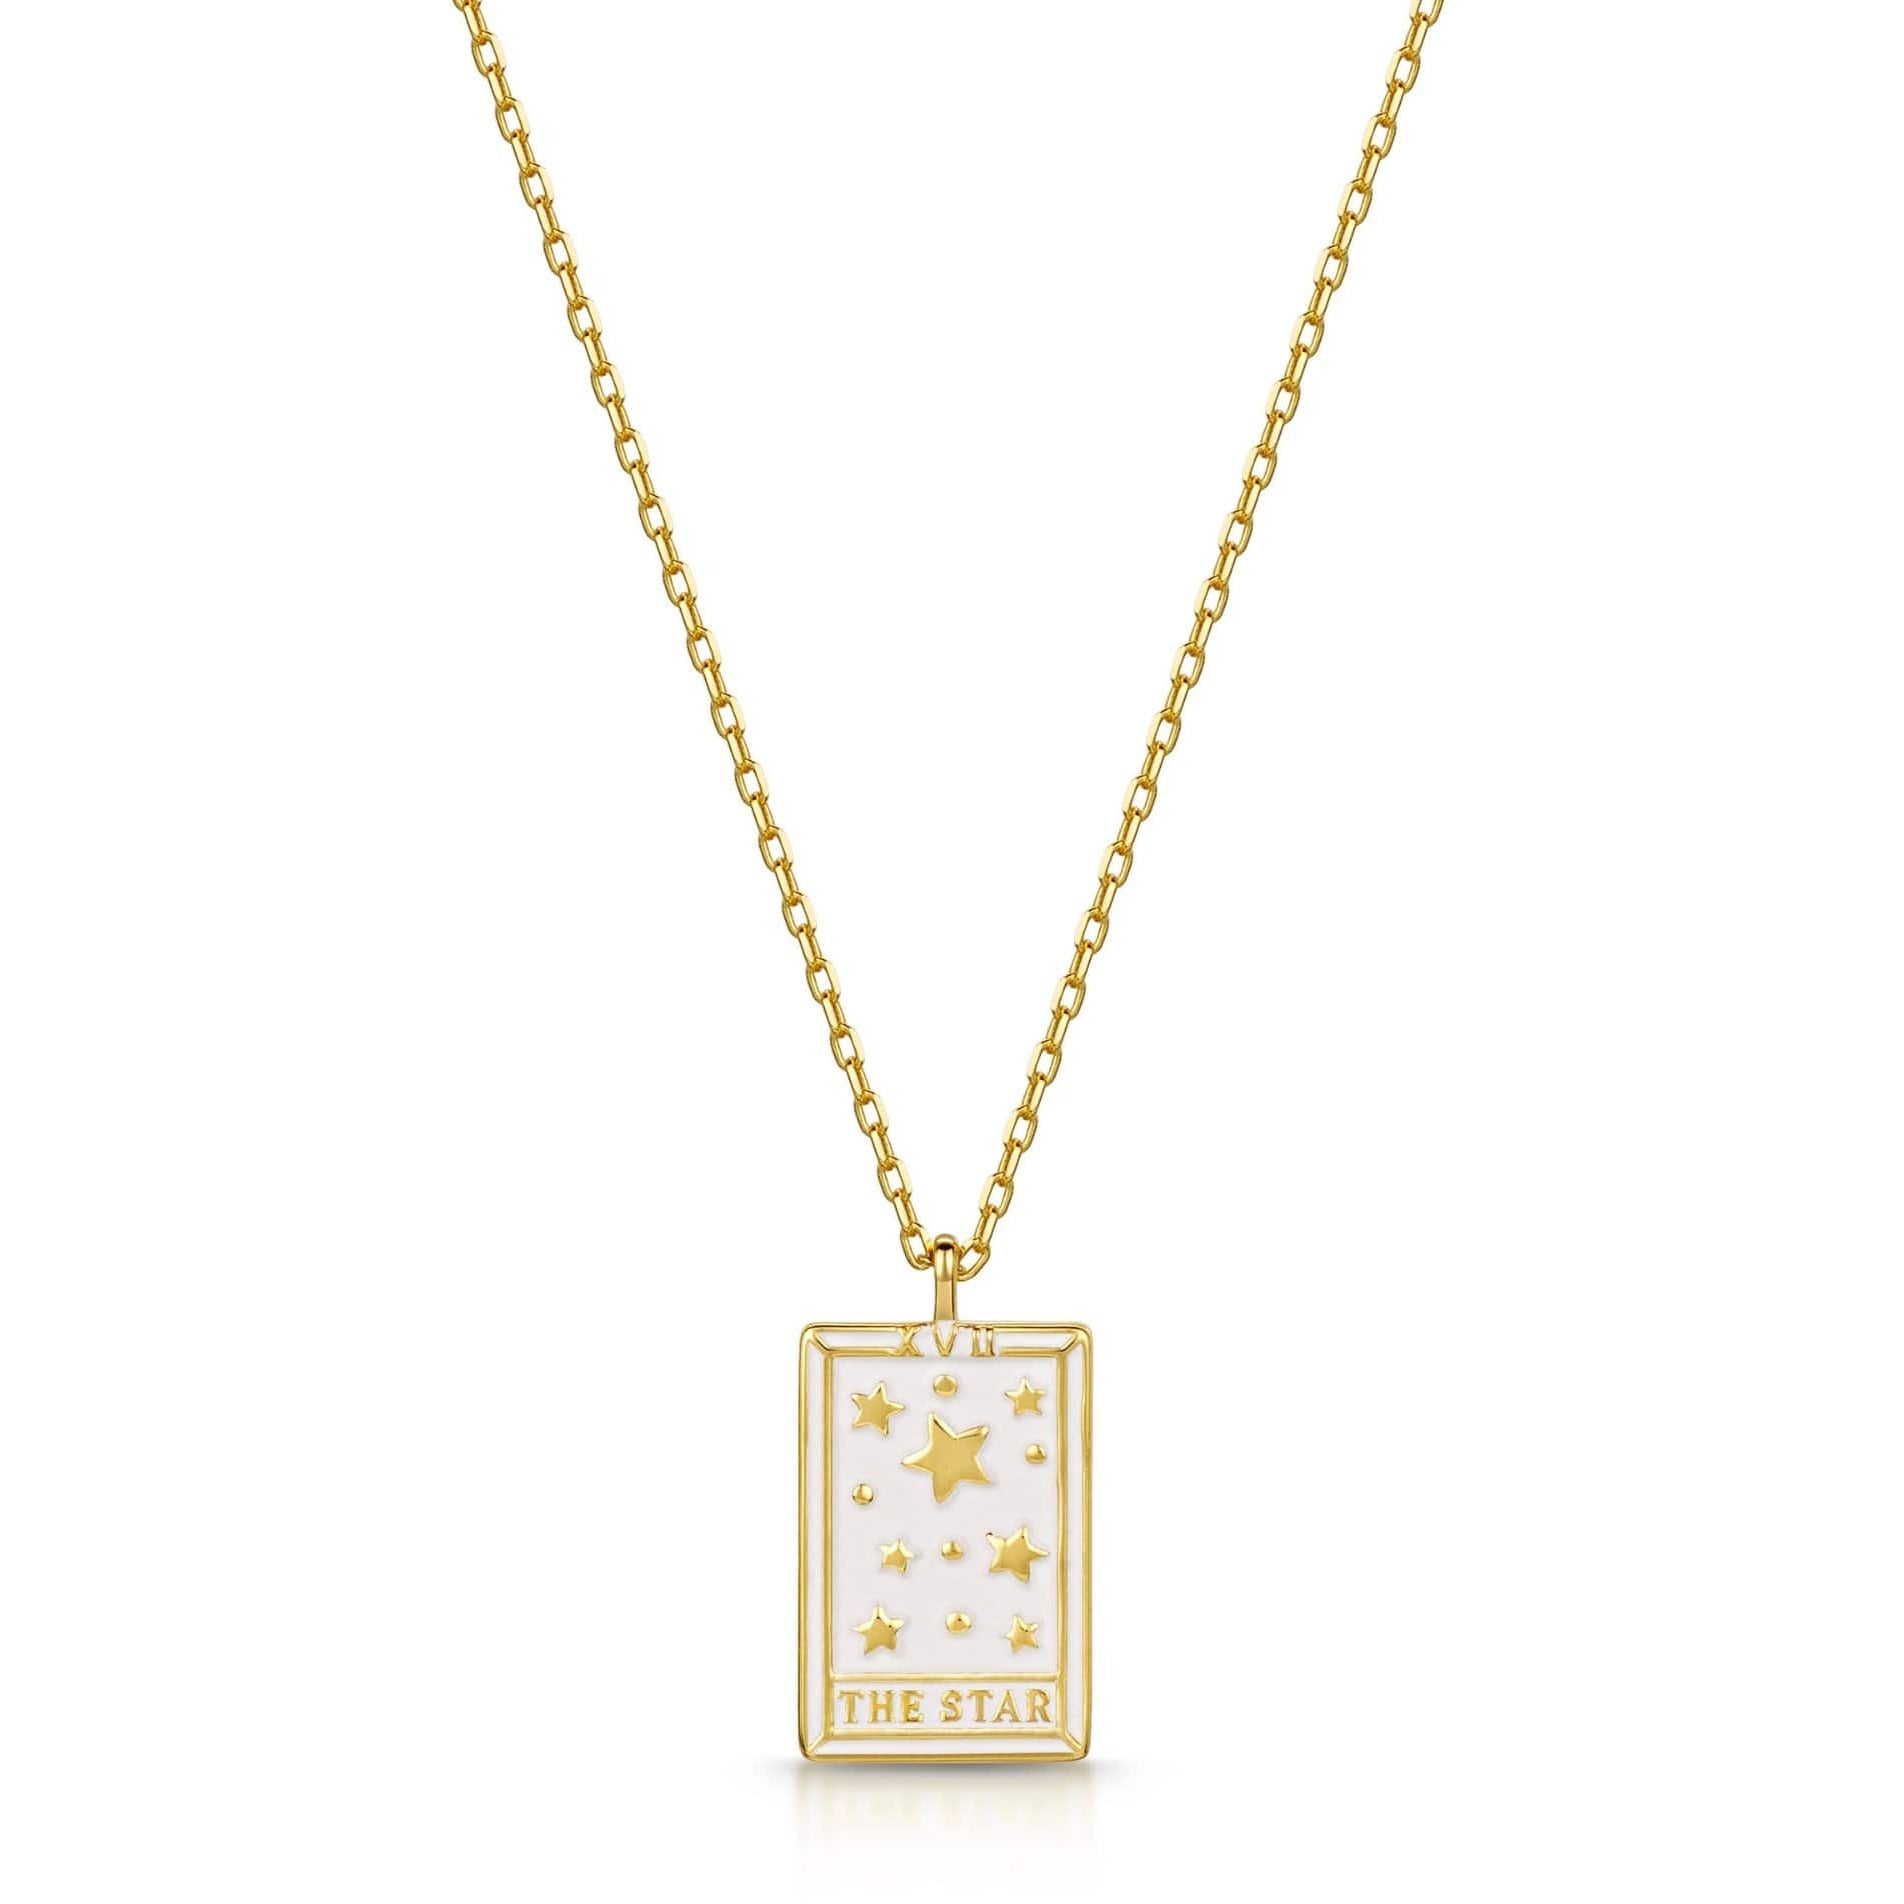 Just Lil Things Artificial Tarot Card Necklace Jltn0645 at Rs 599.00 | गले  का हार - Just Lil Things, Bengaluru | ID: 2849778521955